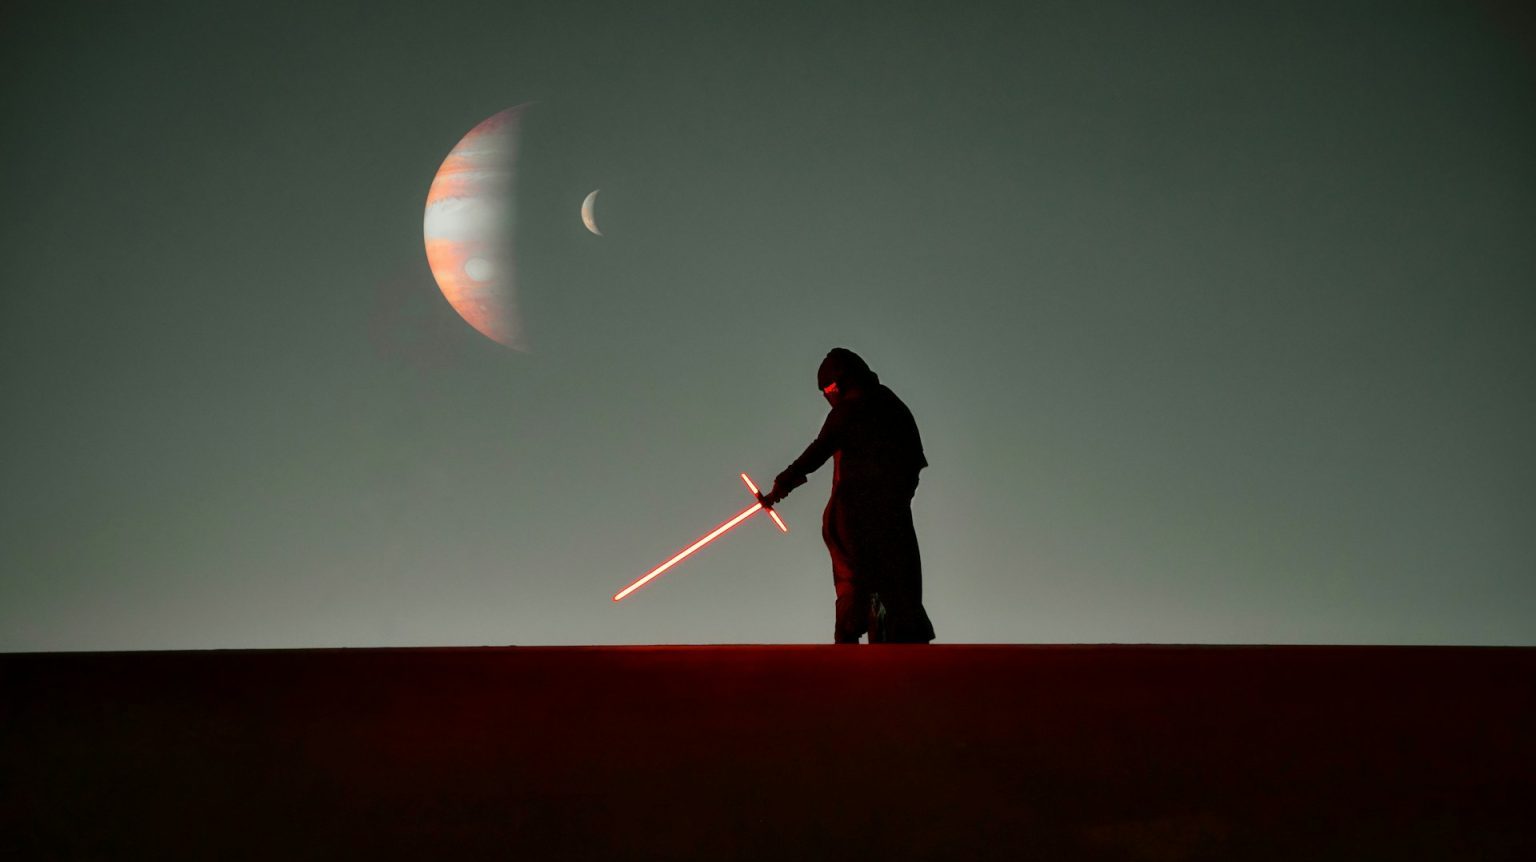 A person in a dark robe wielding a glowing red lightsaber on a desert dune under a night sky with a large crescent moon and a visible planet.